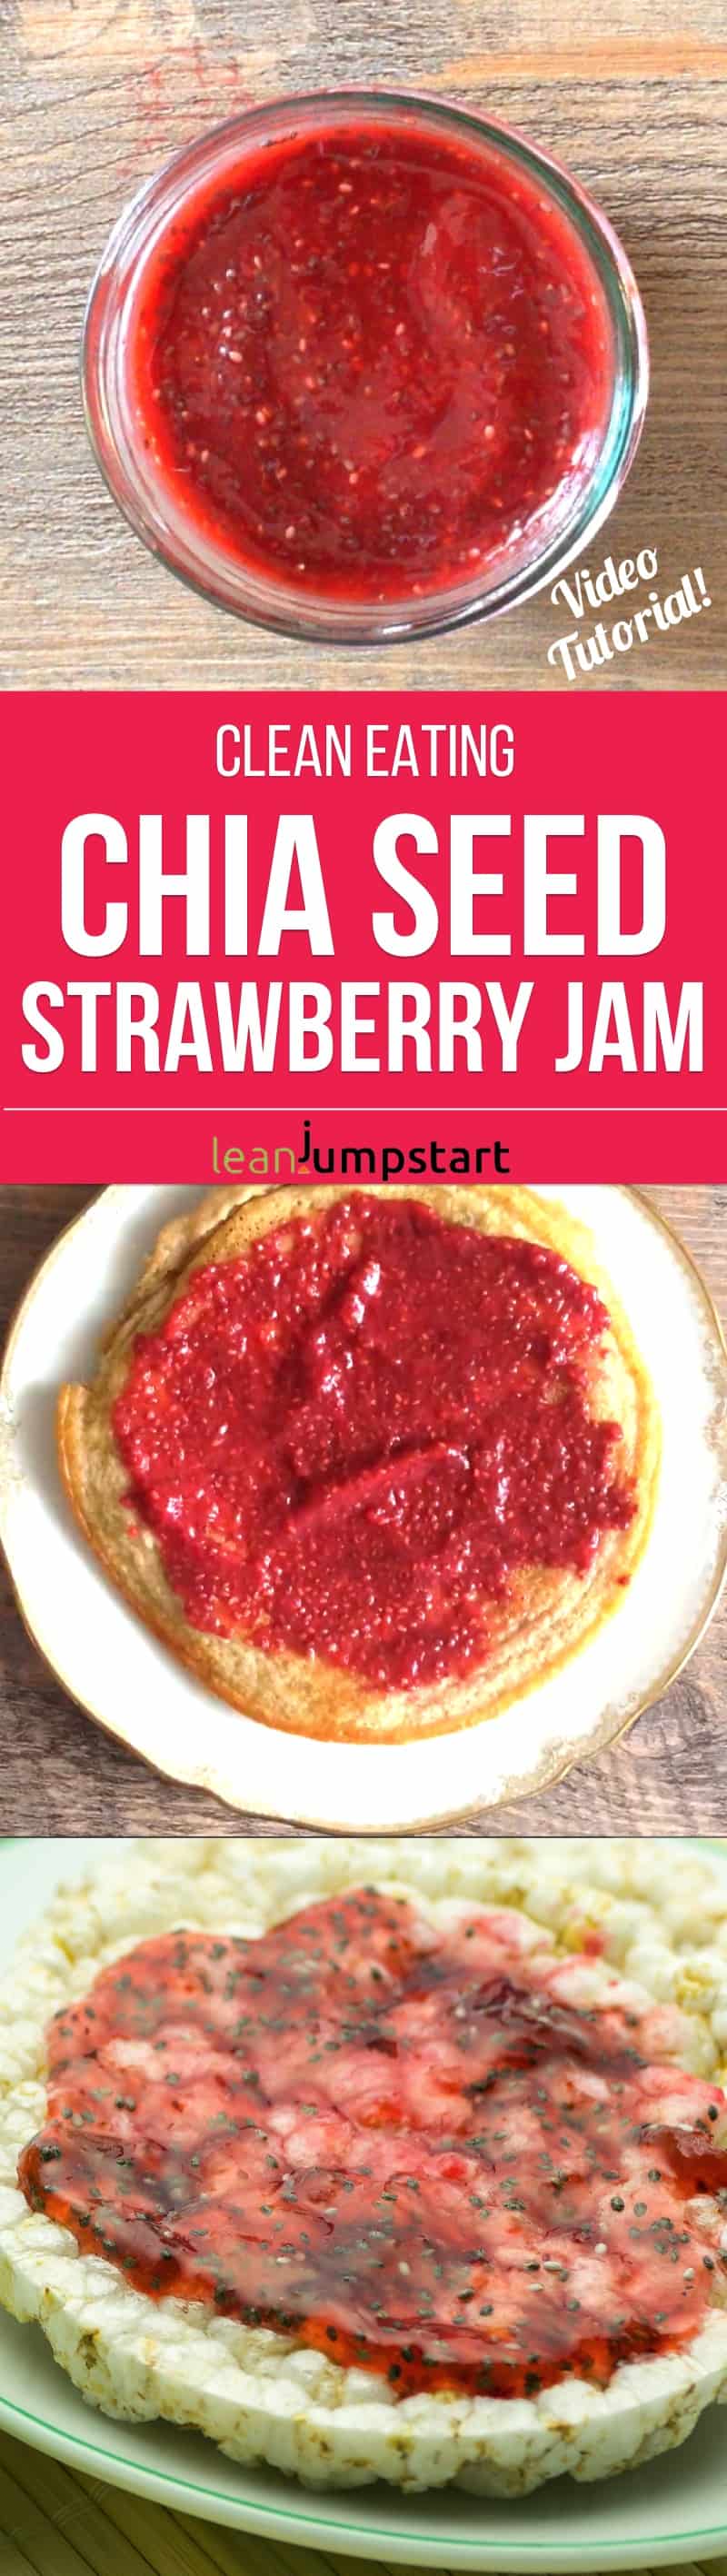 Need a sugar-free jam recipe? This clean eating strawberry chia jam is a delicious spread option for a healthy bit of deliciousness. Repin this and then click through to read about the chia seed jam and watch a short video tutorial.